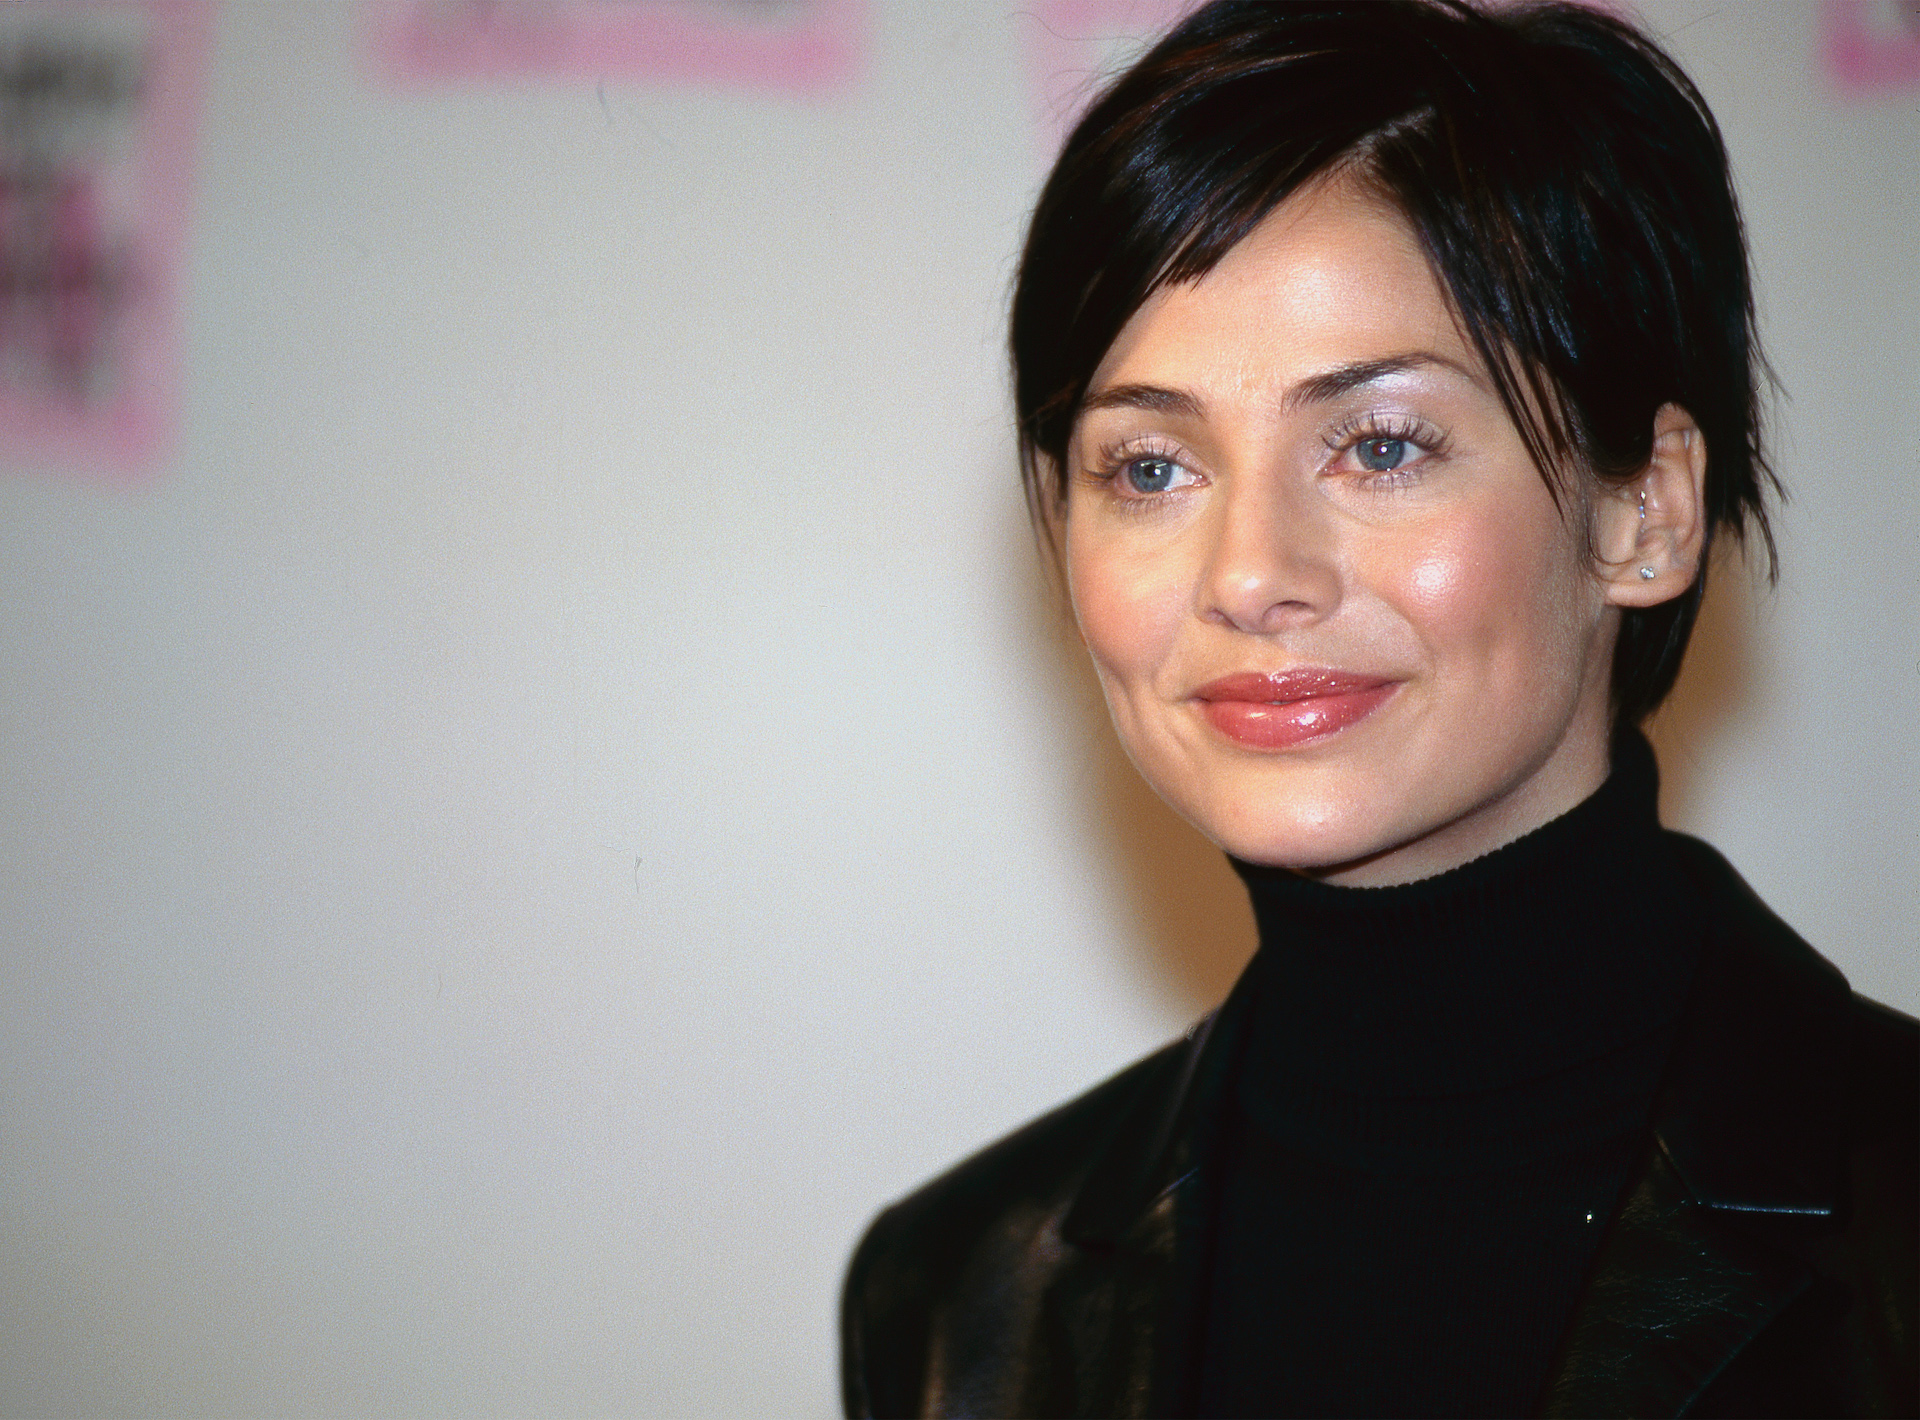 Natalie Imbruglia Reveals Why She Partied So Much